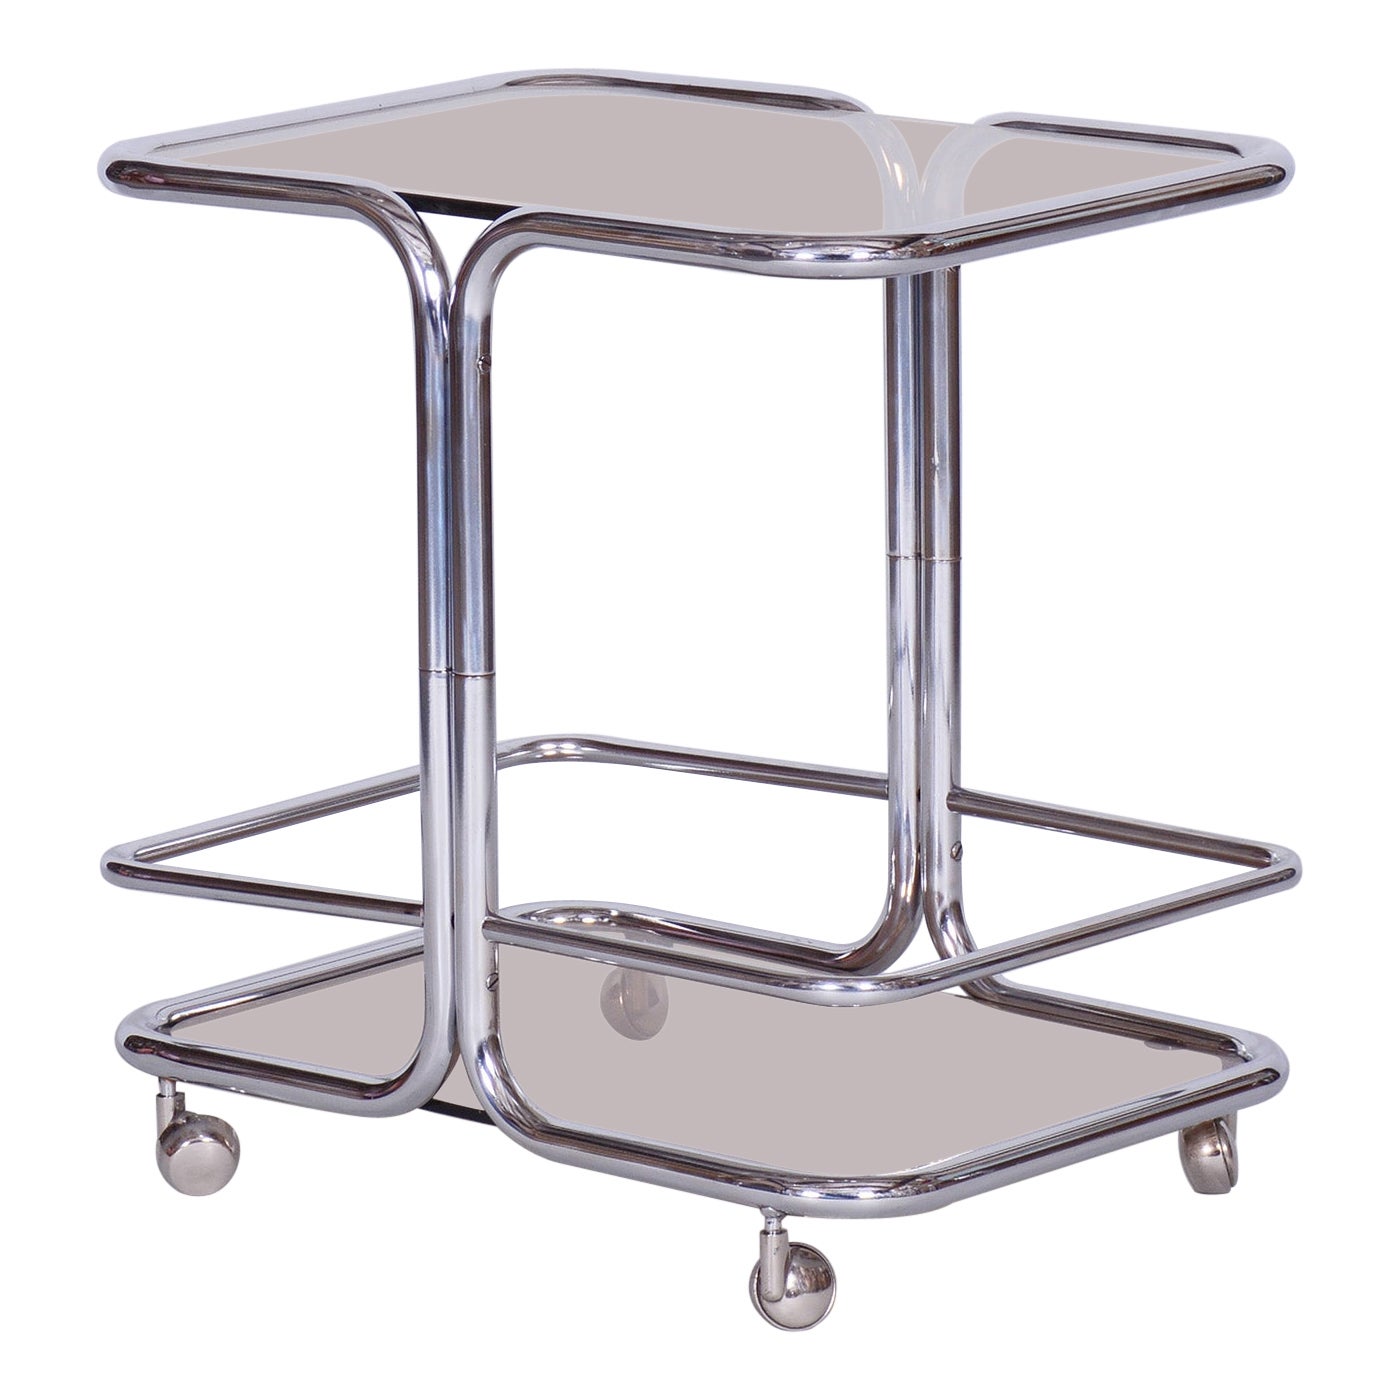 Original Midcentury Chrome Serving Trolley, Smoked Glass, 1960s, Czechia For Sale